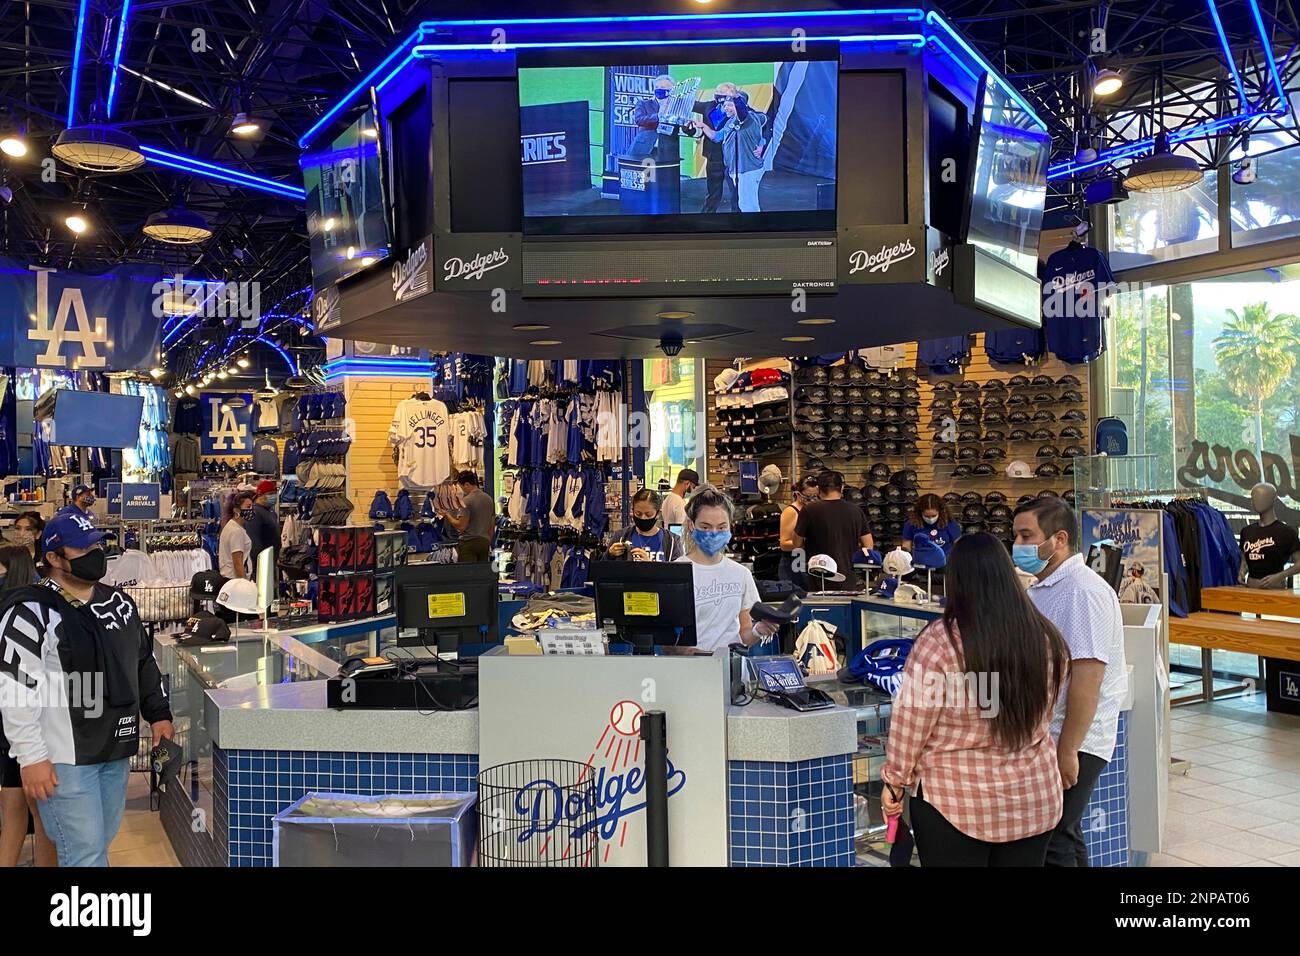 The Dodgers Clubhouse store at Universal CityWalk, Monday, Nov. 2